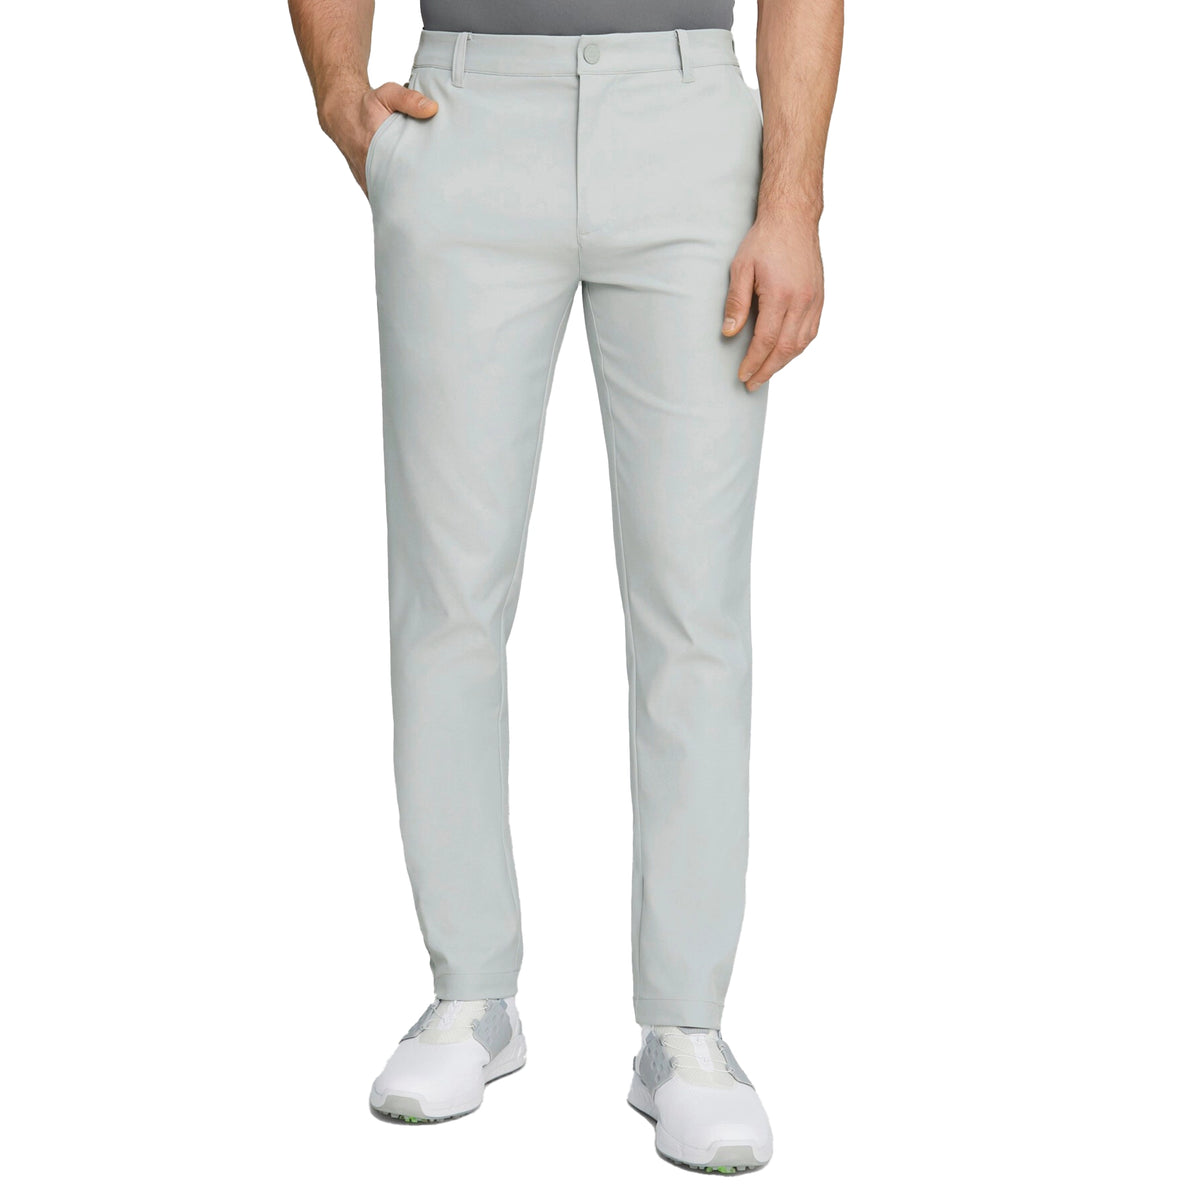 Puma Dealer Tailored Pant — The House of Golf